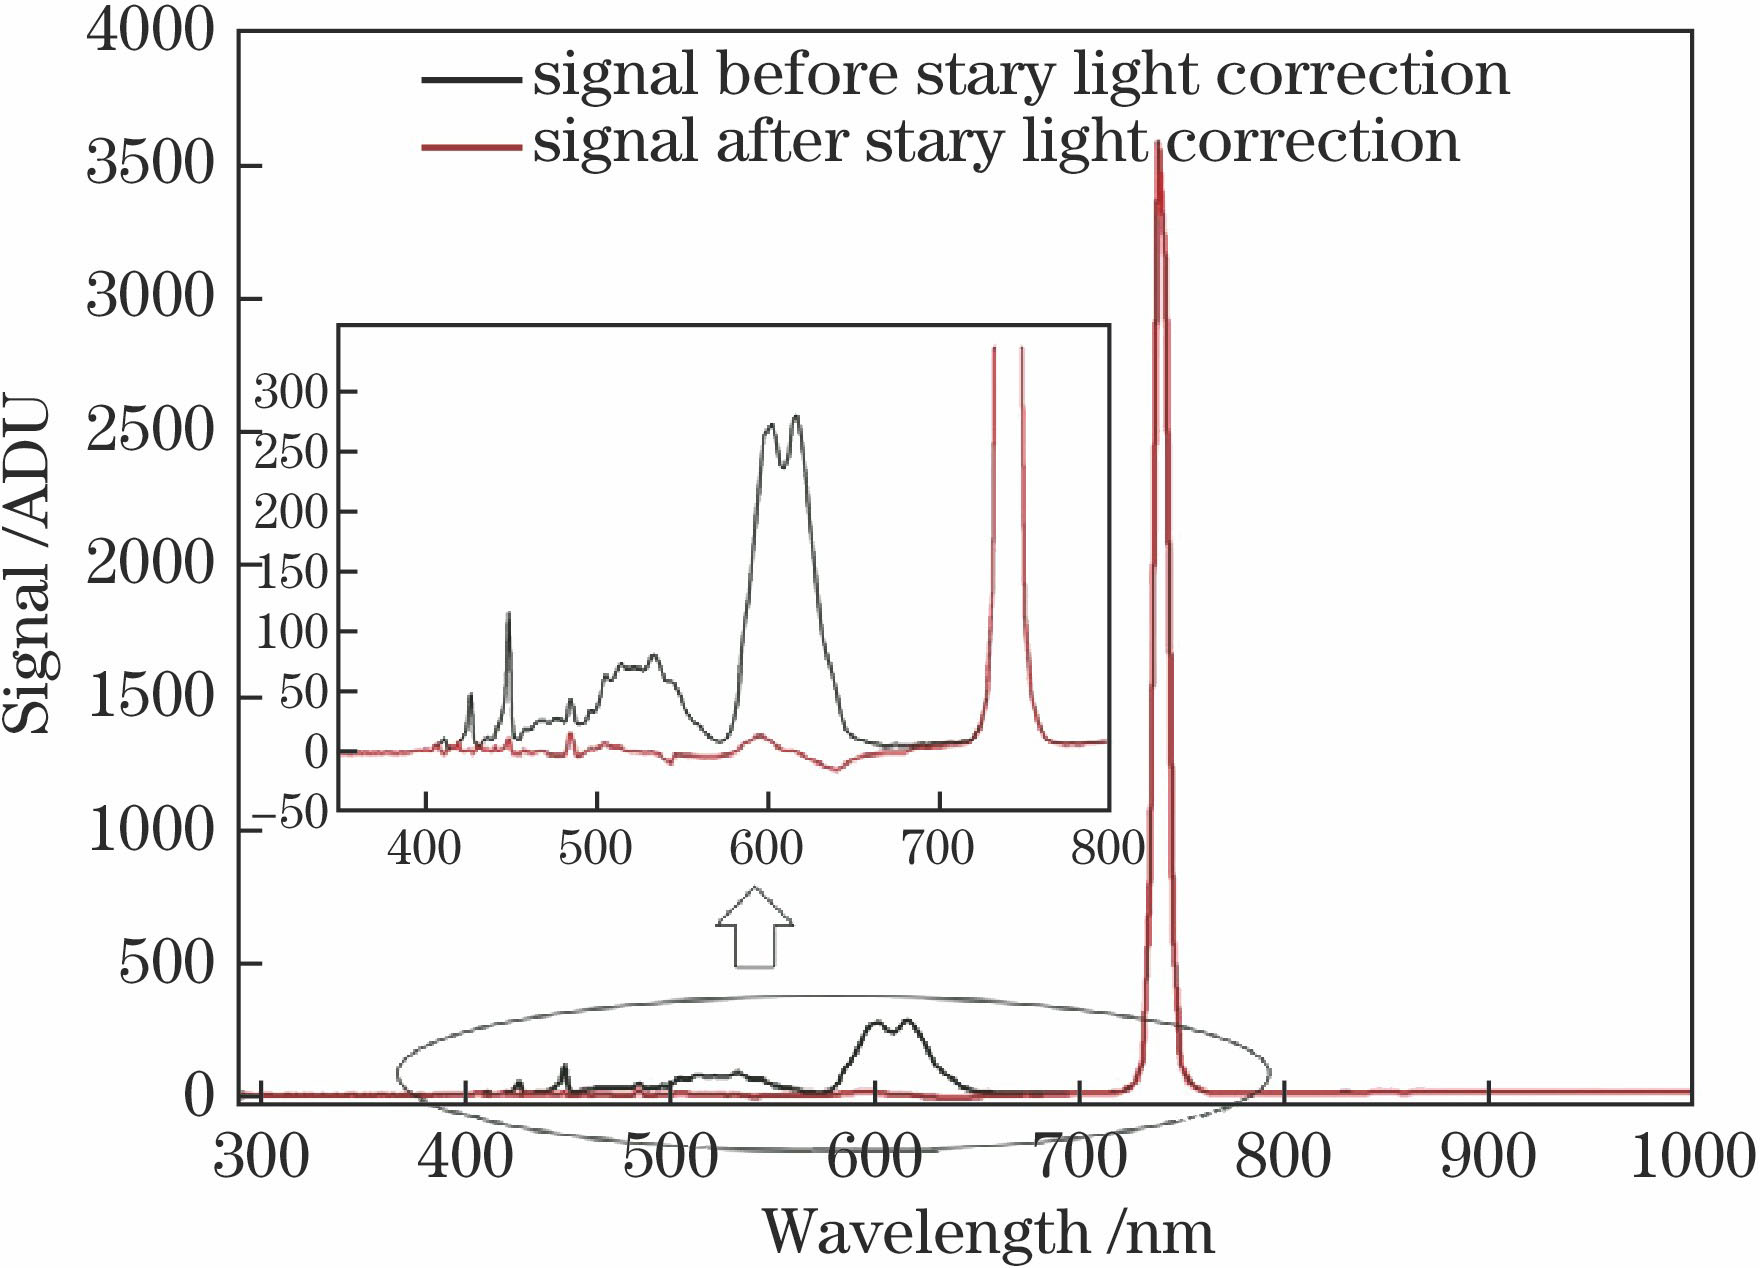 Response curve of 740 nm monochromatic light before and after stray light correction